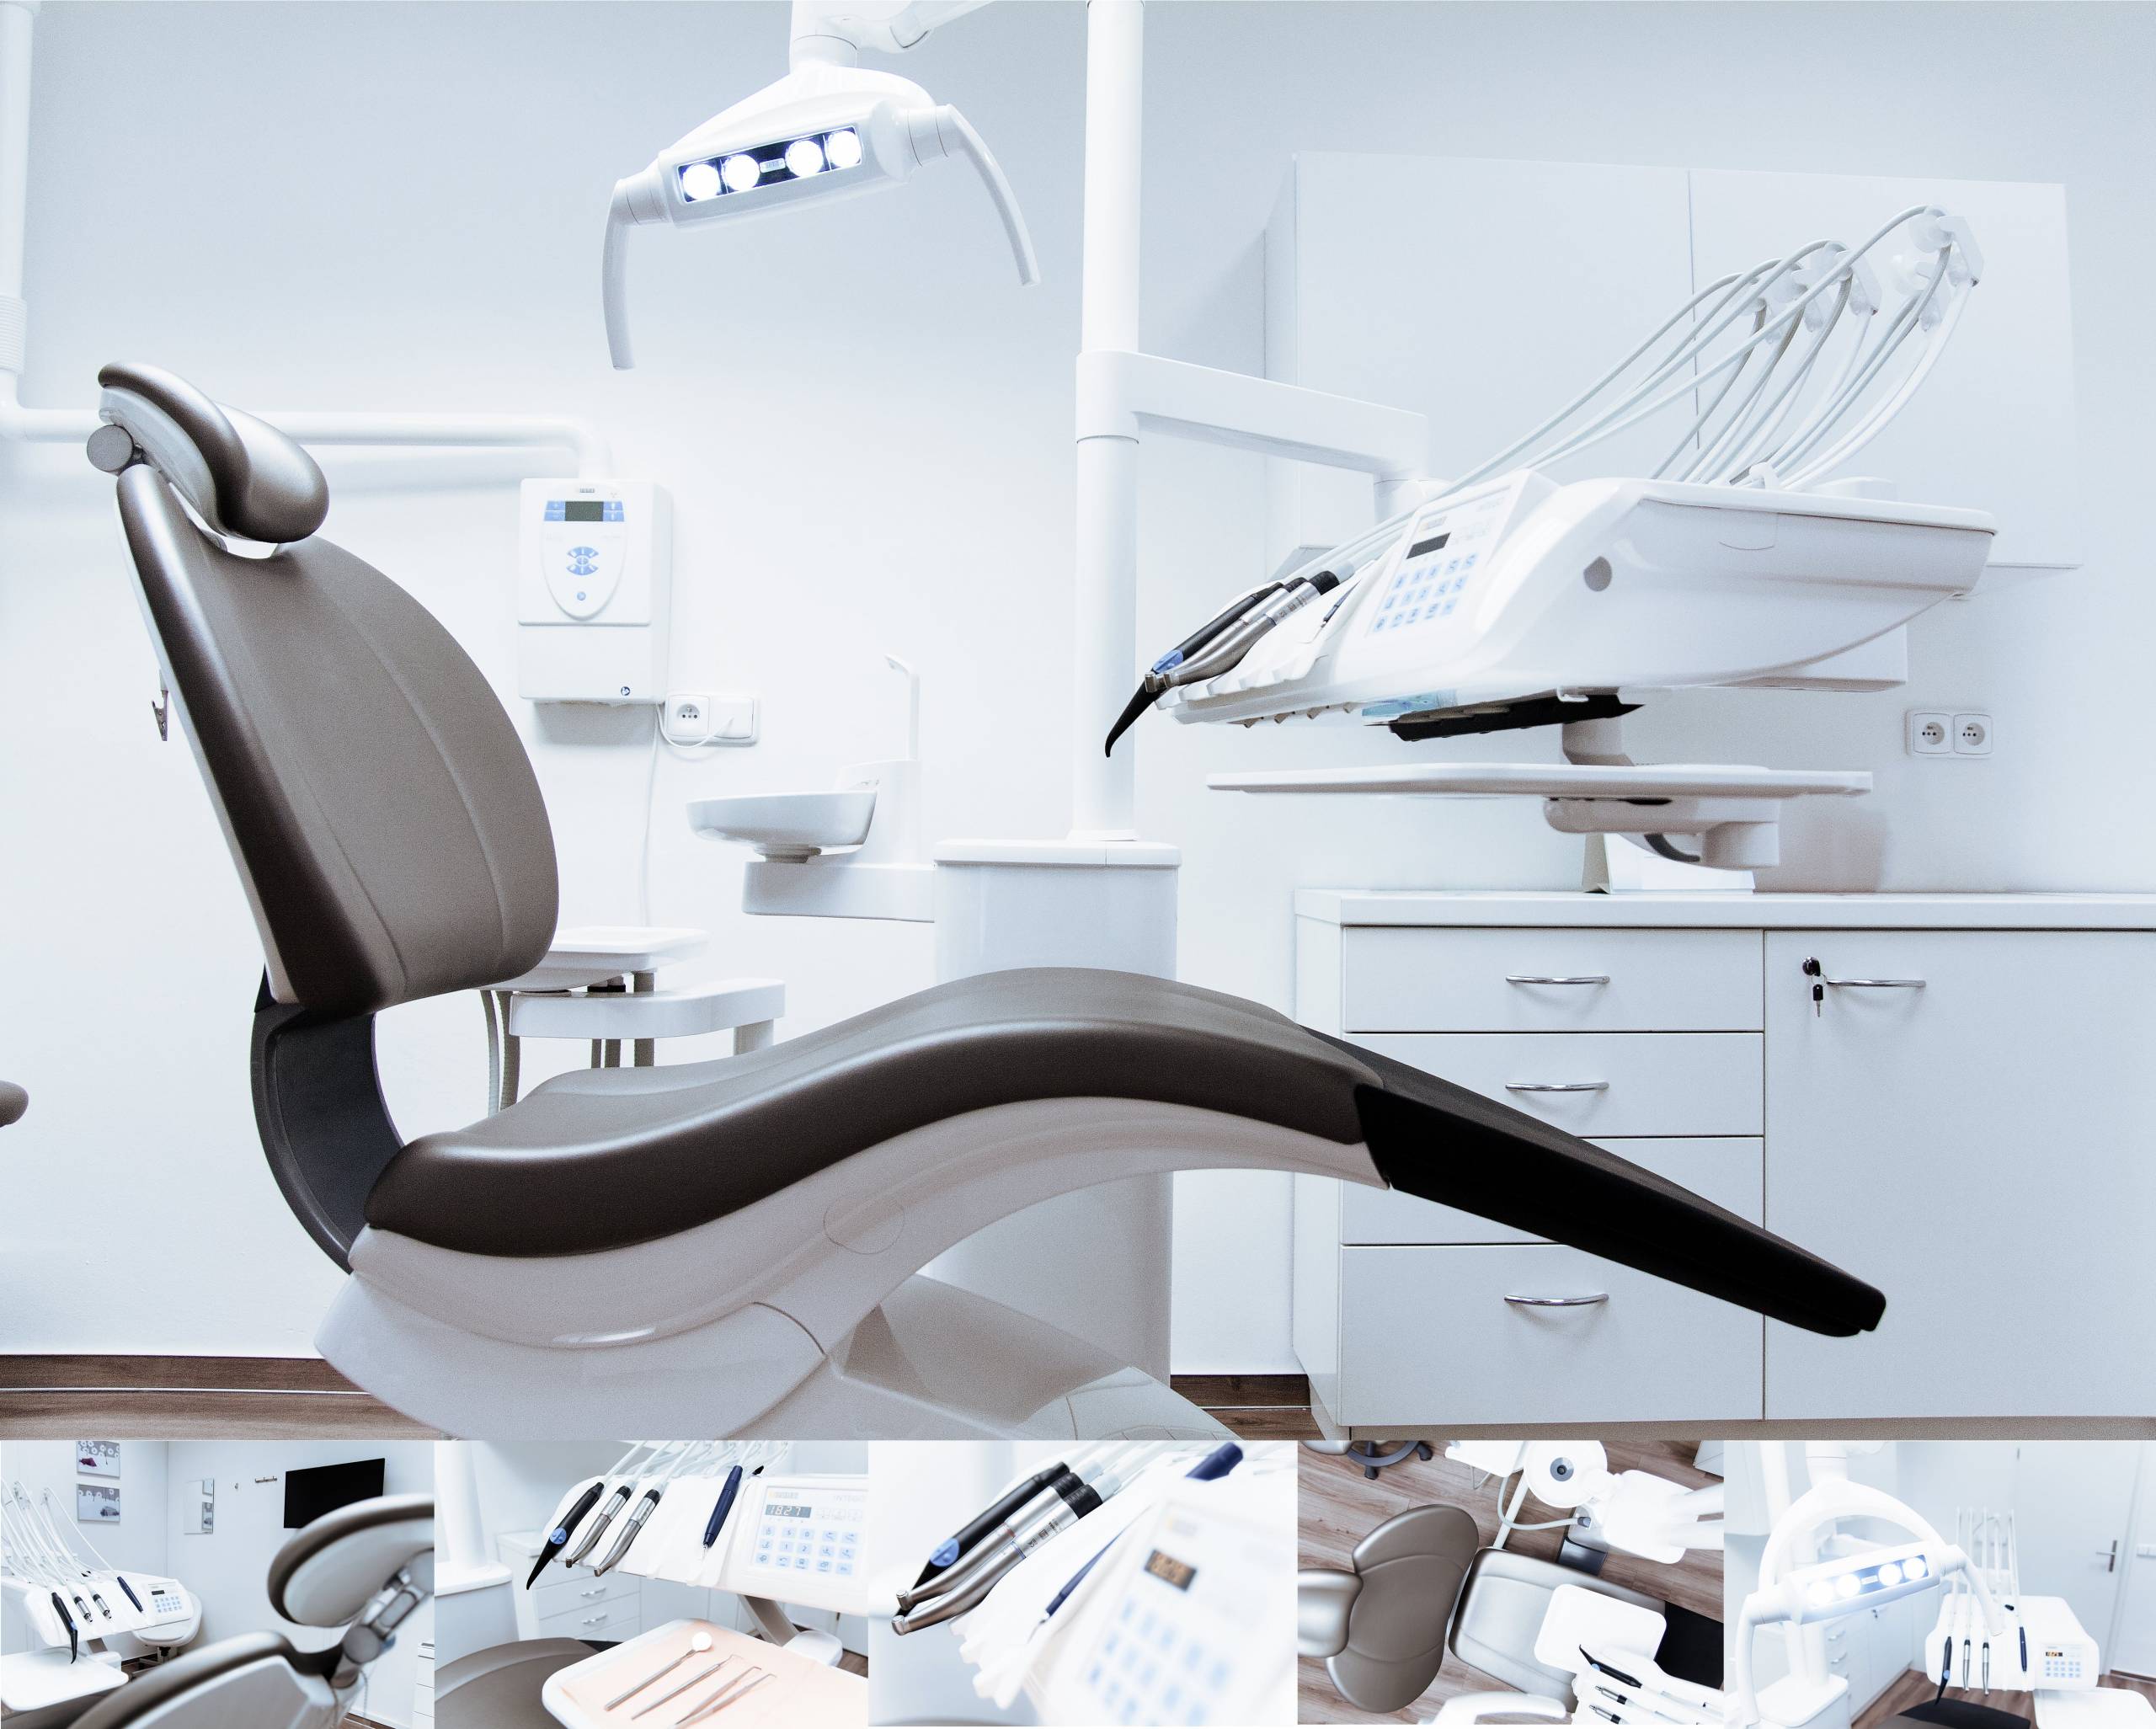 A collage of images showcasing a modern dental clinic room. The central image features a dental chair with an overhead lamp in a clean, white room with dental equipment on the side. The surrounding images provide close-up views of the dental instruments, sink, and other sterilized tools used for dental procedures, emphasizing the clinic's high standards of hygiene and organization.